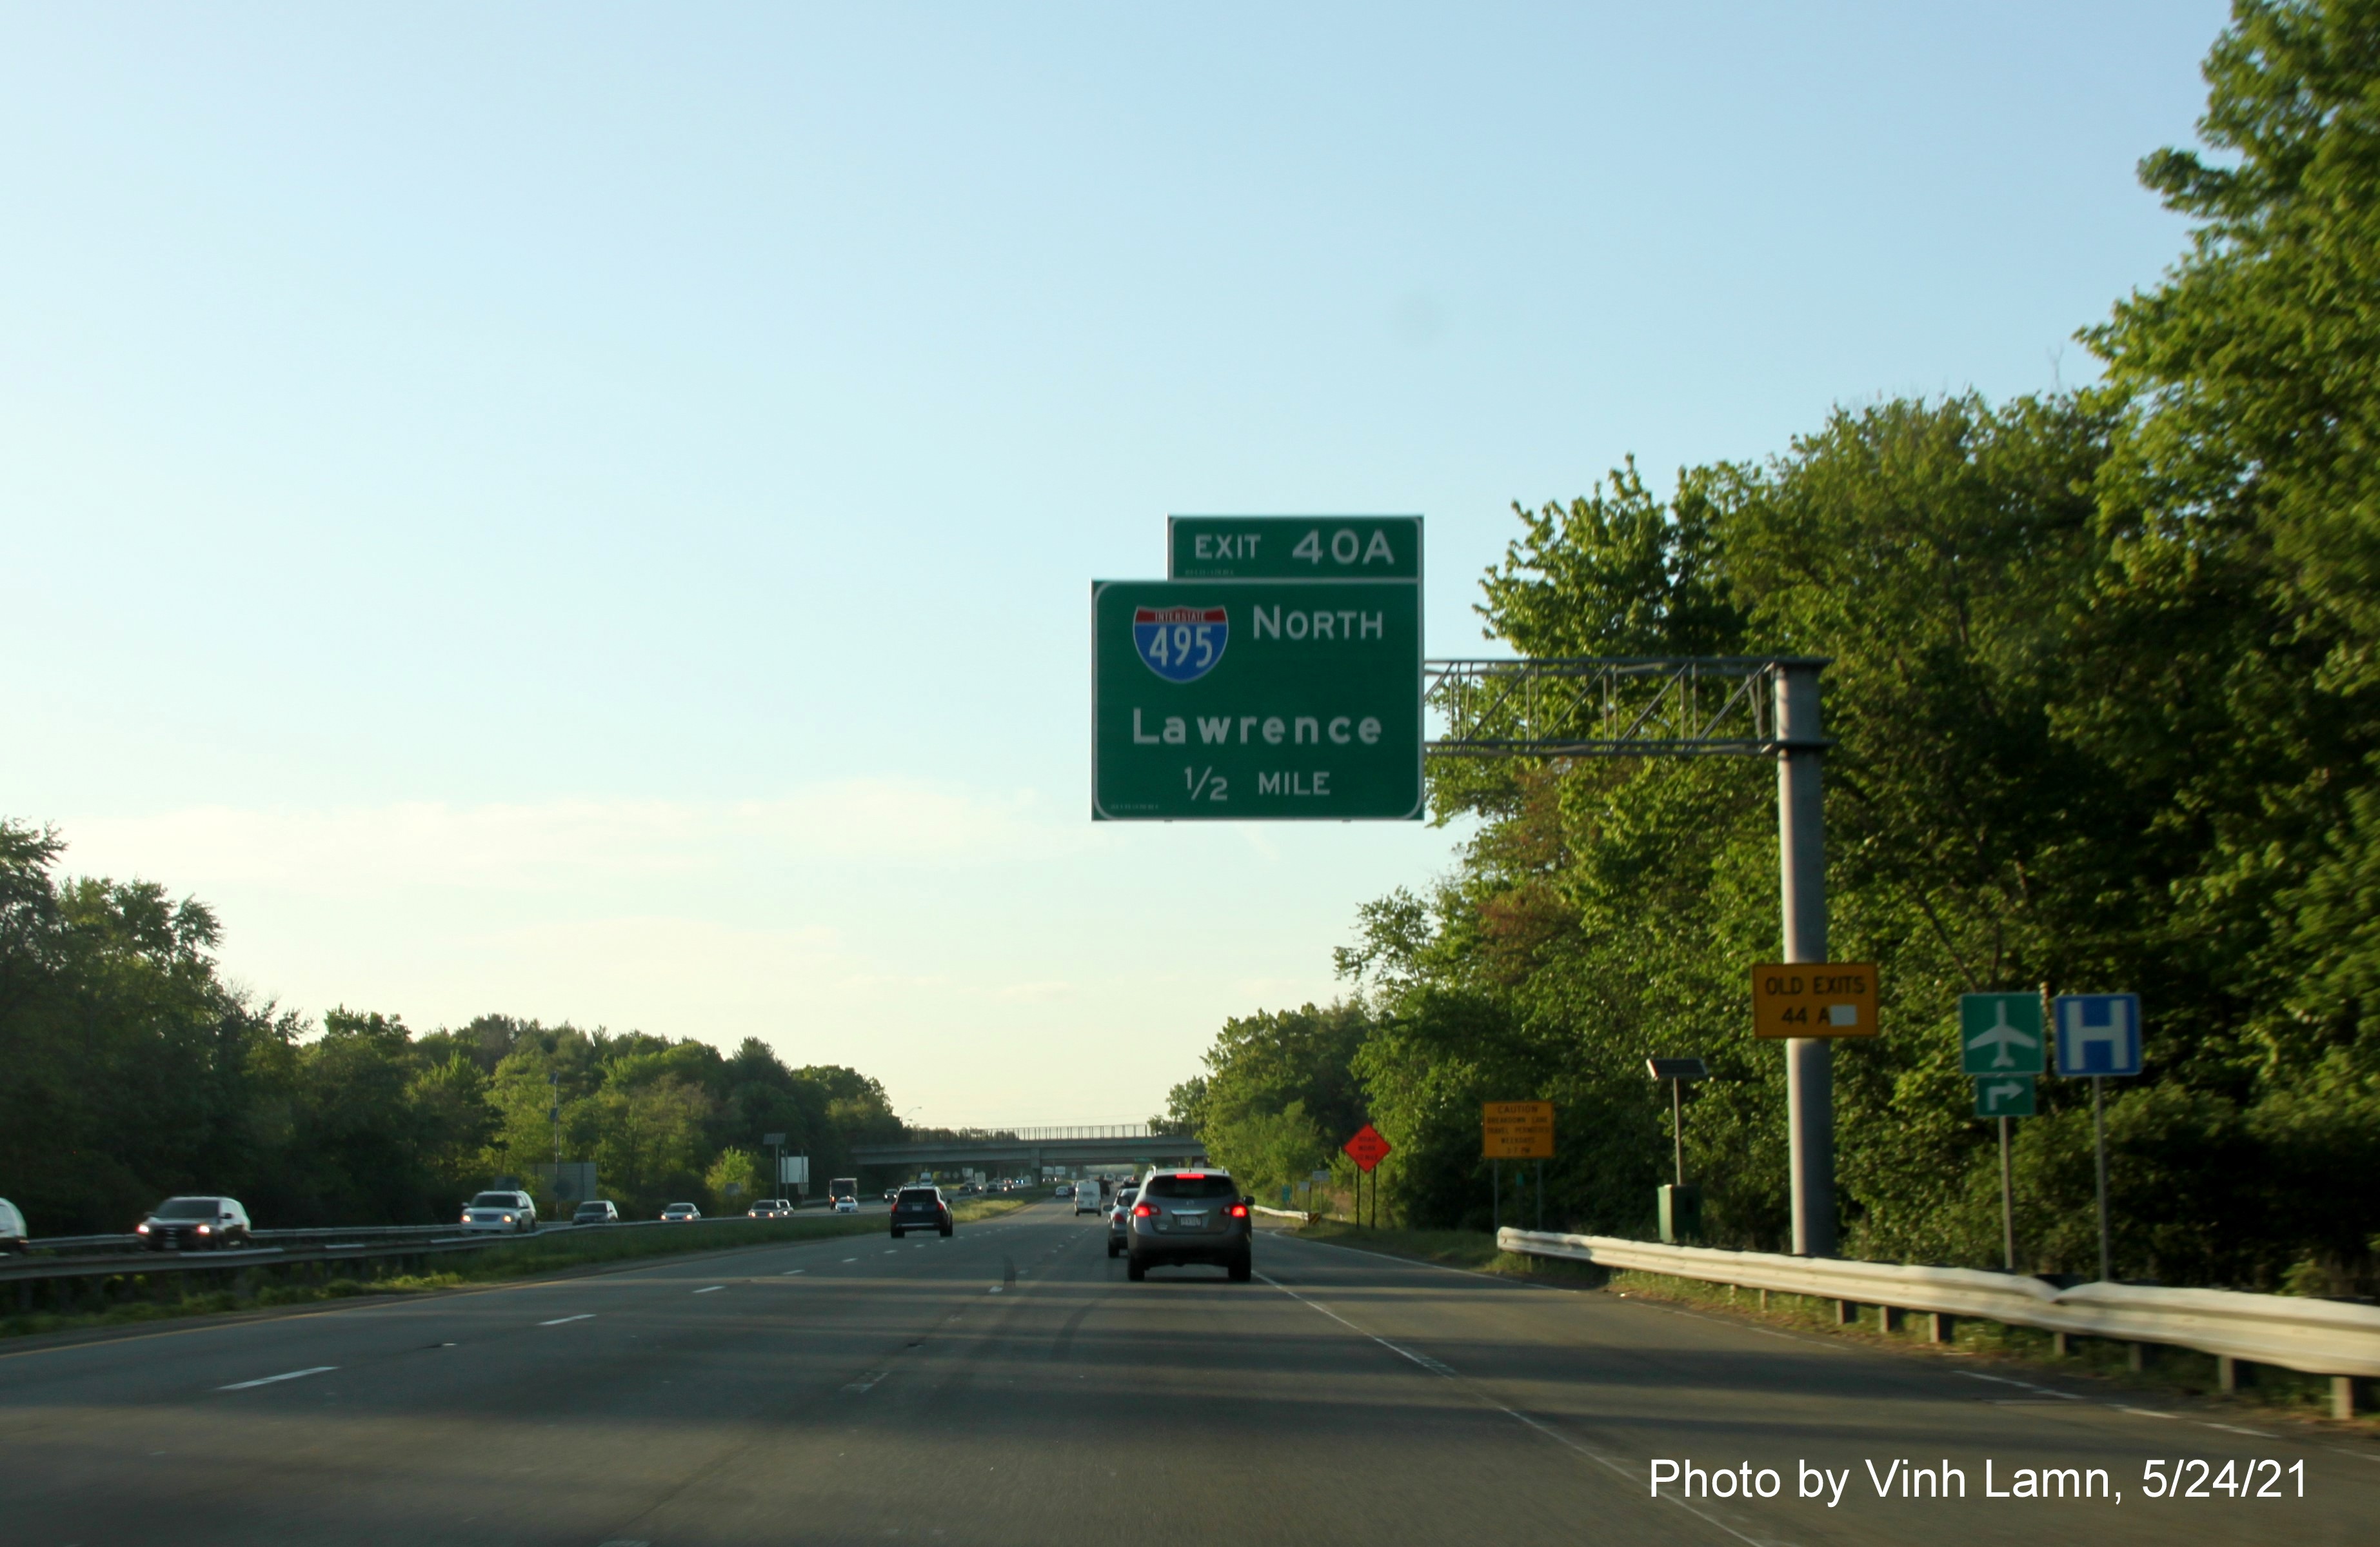 Image of 1/2 mile advance overhead sign for I-495 North exit with new milepost based exit number and yellow Old Exits 44 B advisory sign on support on I-93 North in Andover, by Vinh Lam, May 2021